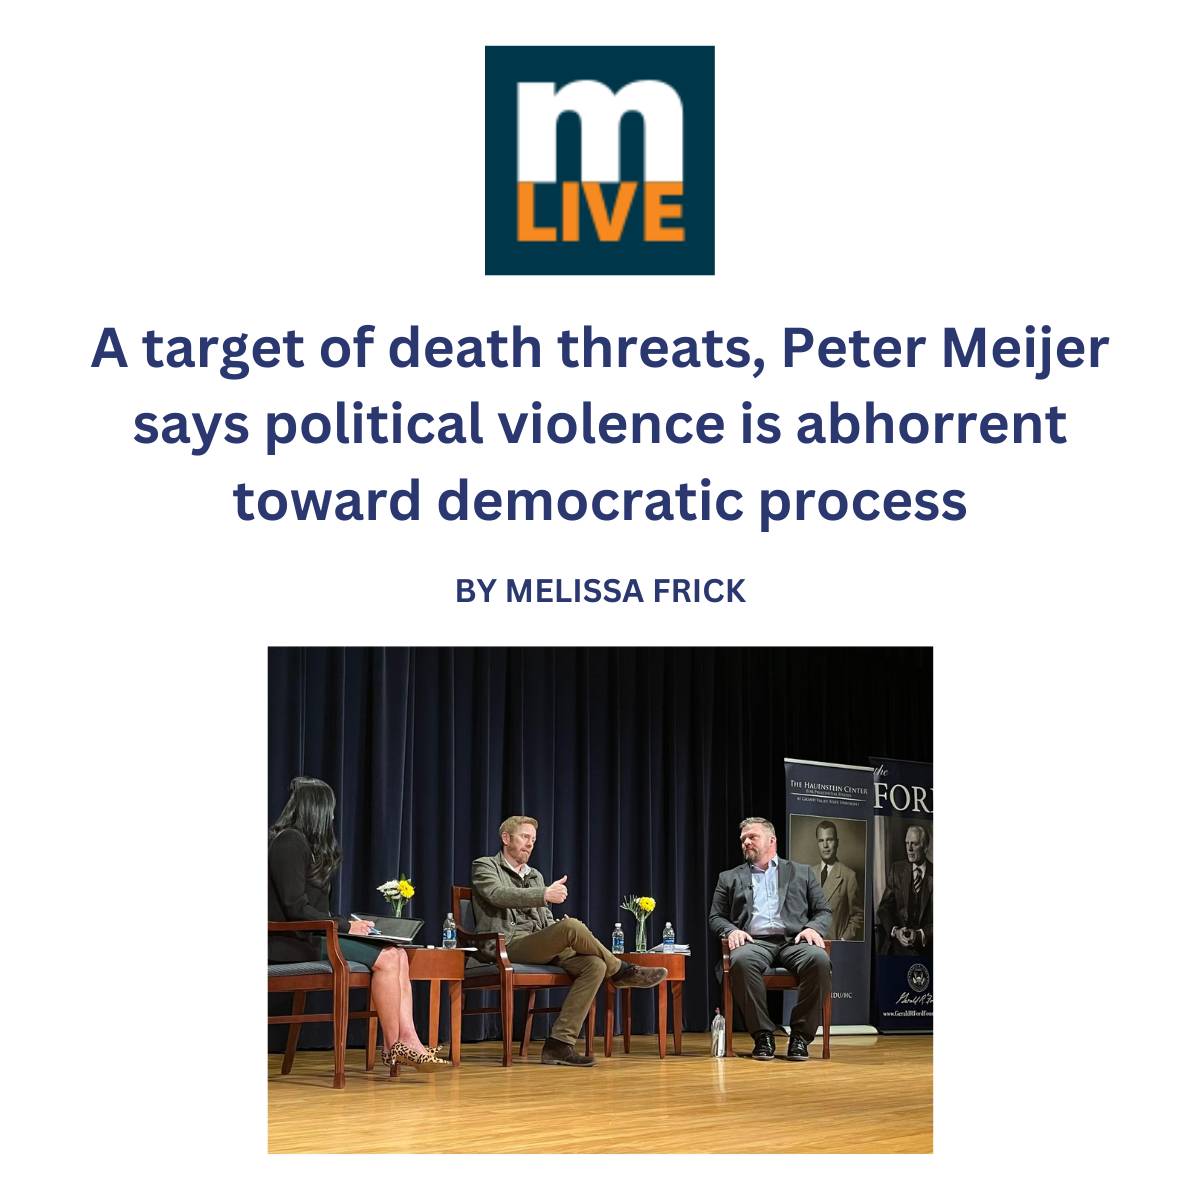 A target of death threats, Peter Meijer says political violence is abhorrent toward democratic process